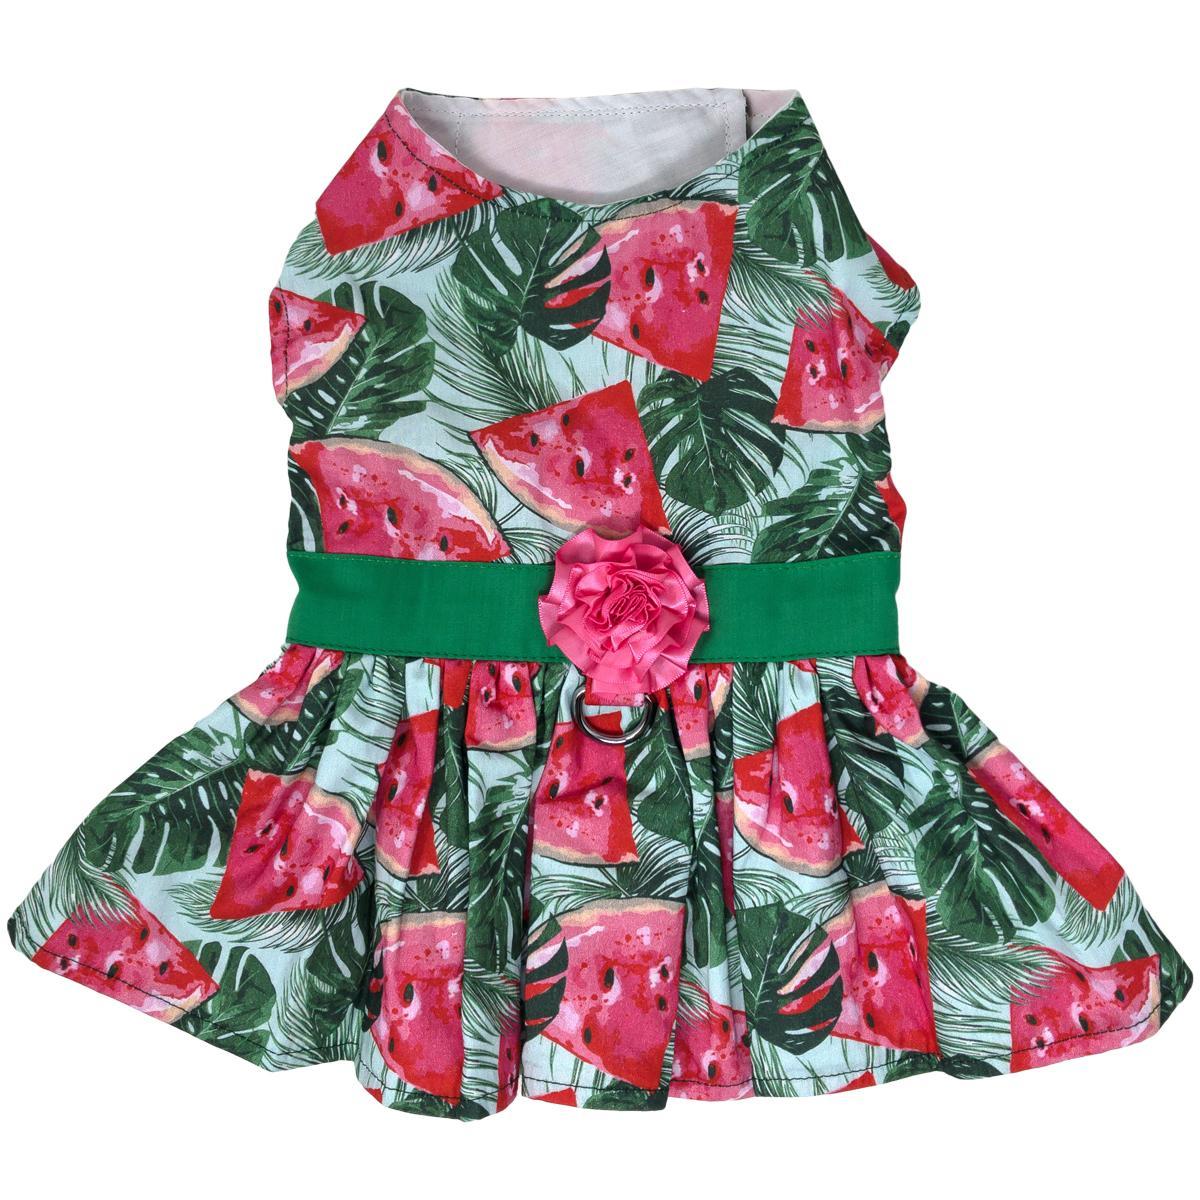 Juicy Watermelon Dog Harness Dress with Matching Leash by Doggie Design